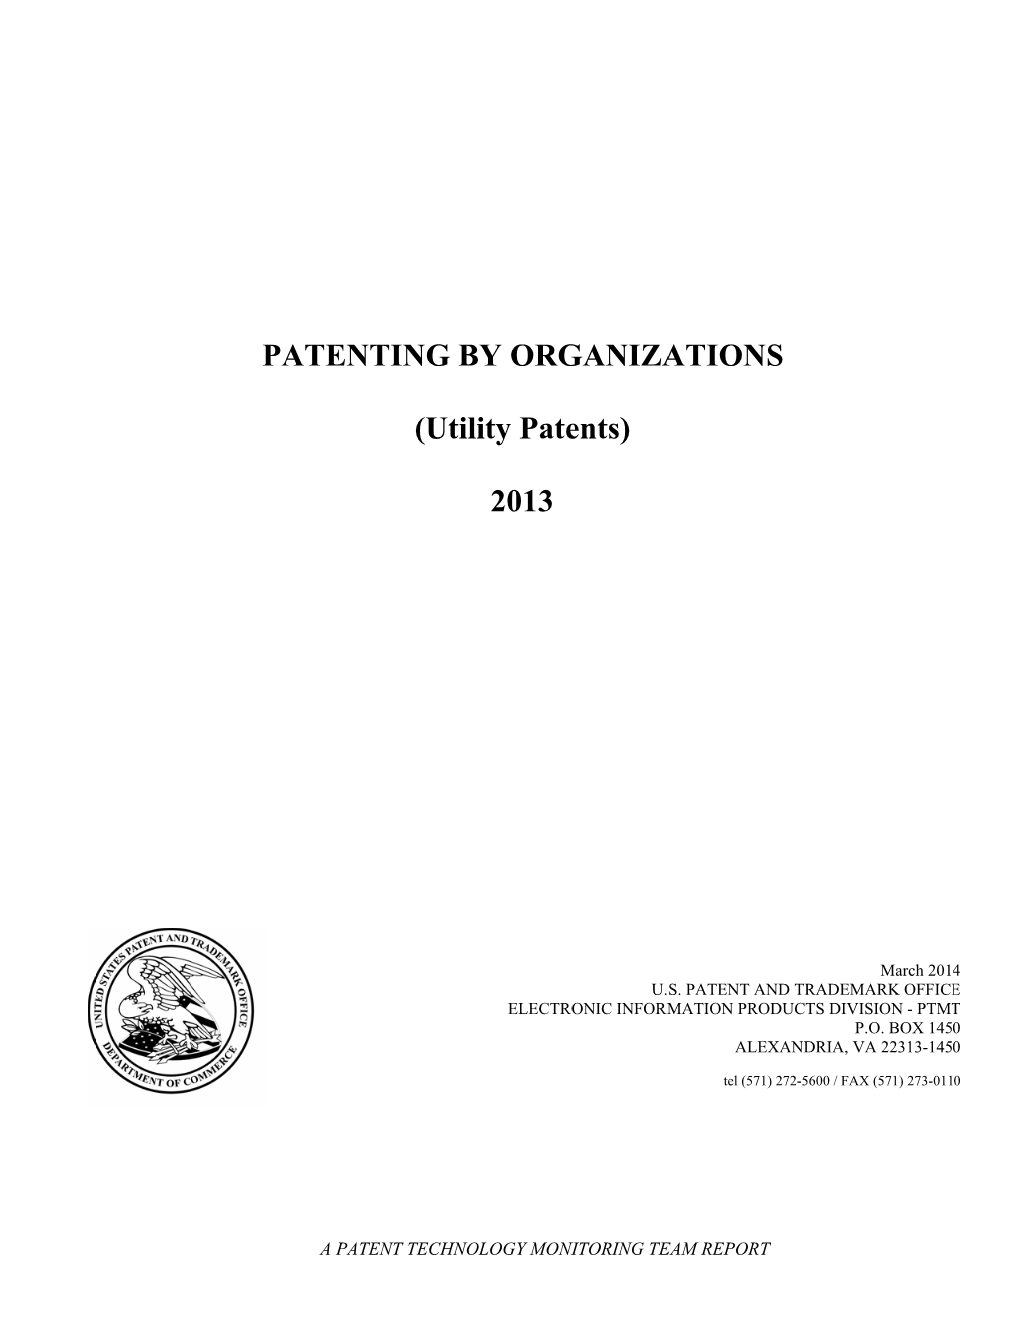 Patenting by Organizations 2013